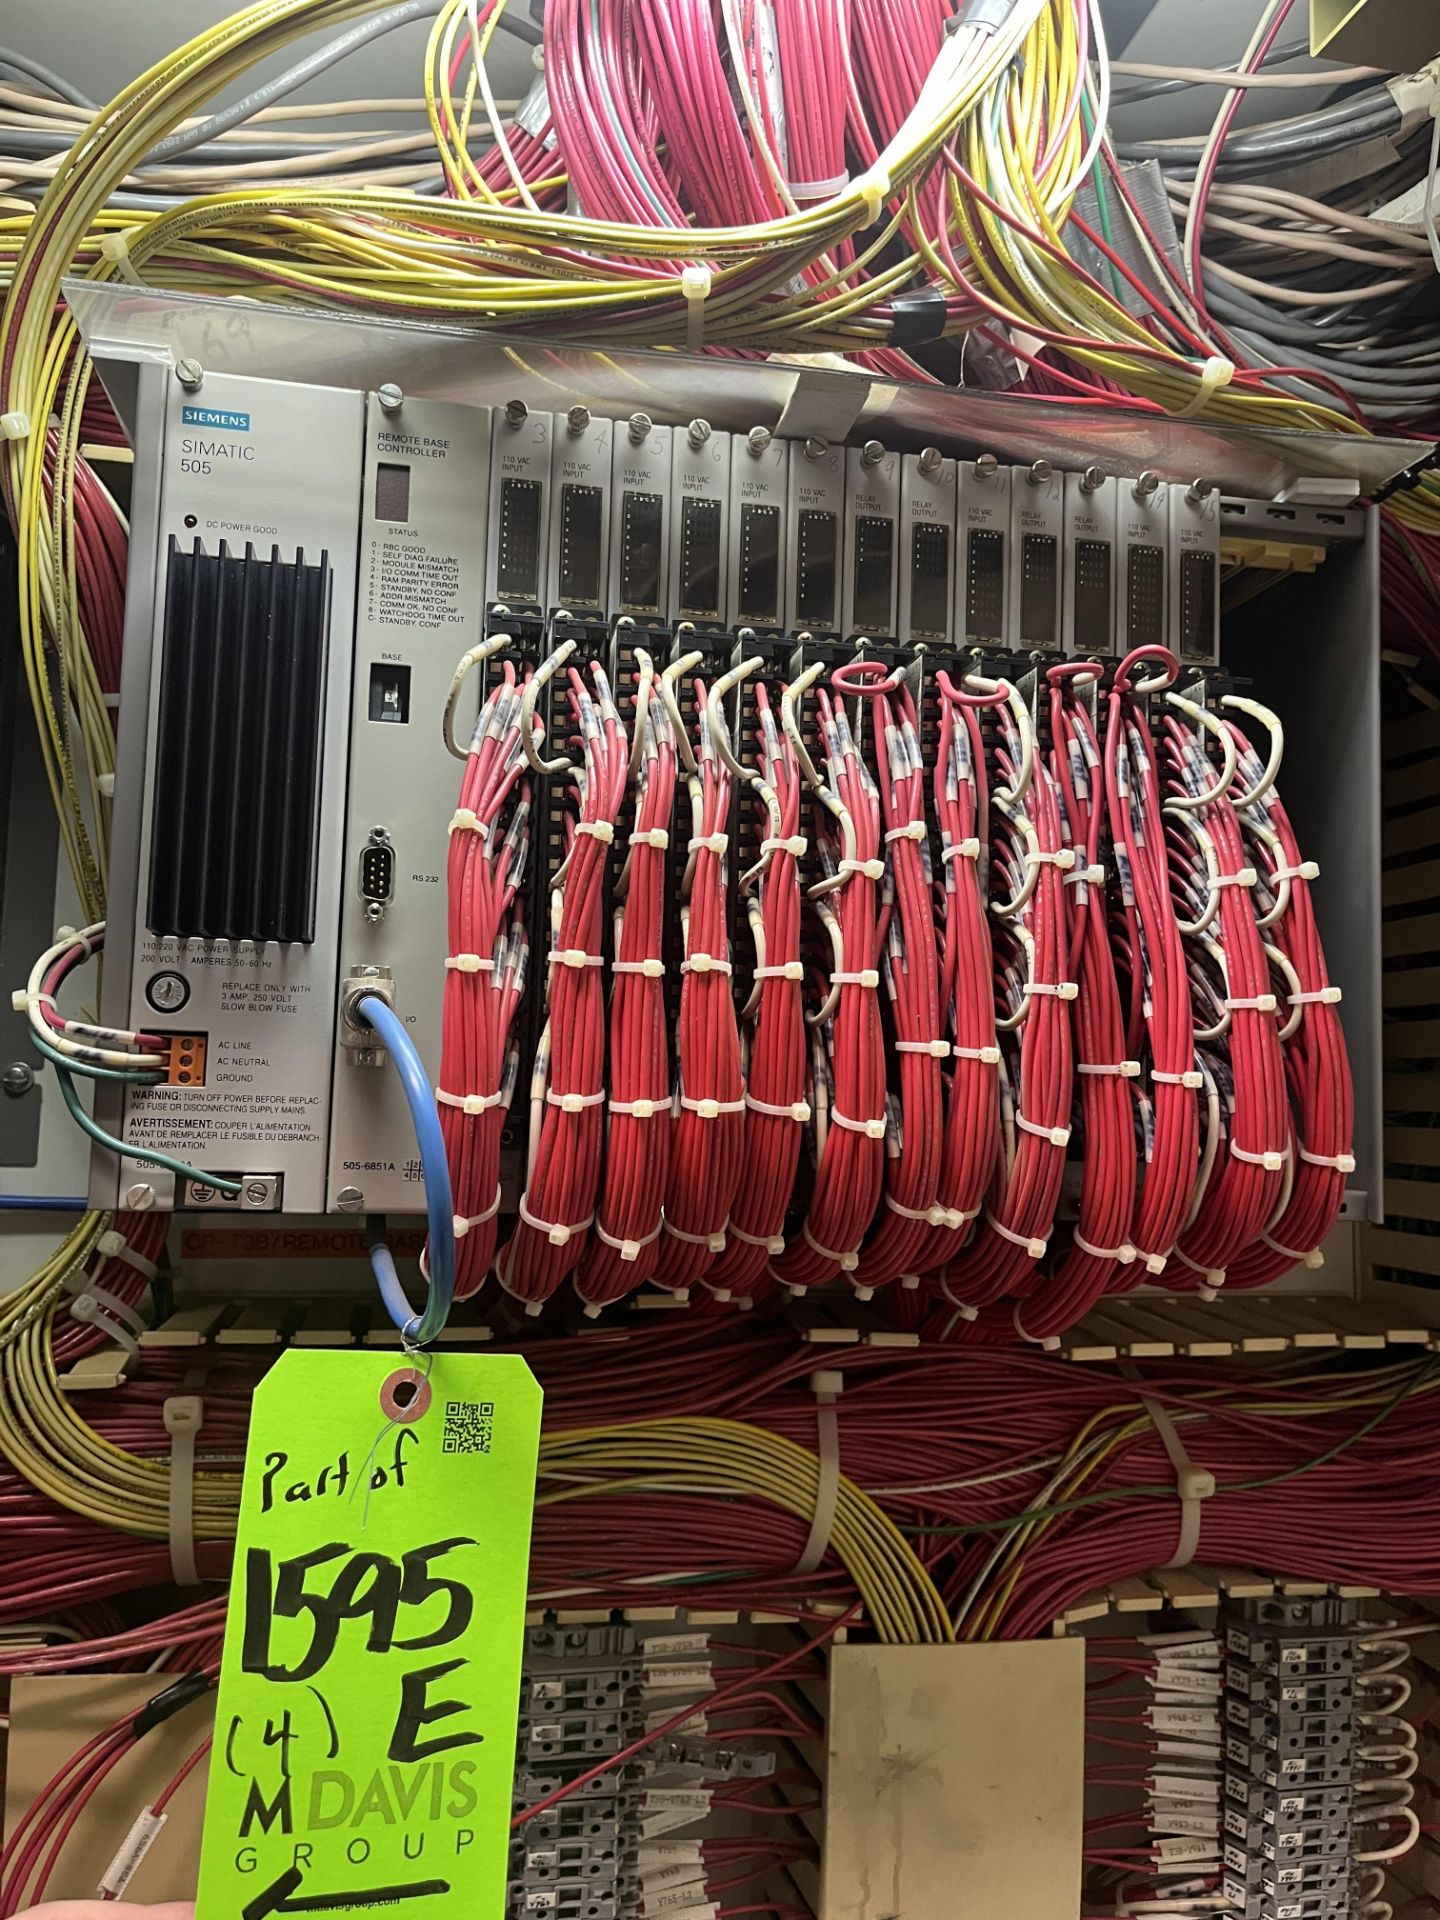 (3)SIMENS SIMATIC 505 POWER SUPPLY PLC RACK (Located Freehold, NJ) (Simple Loading Fee $357.50) - Image 3 of 9